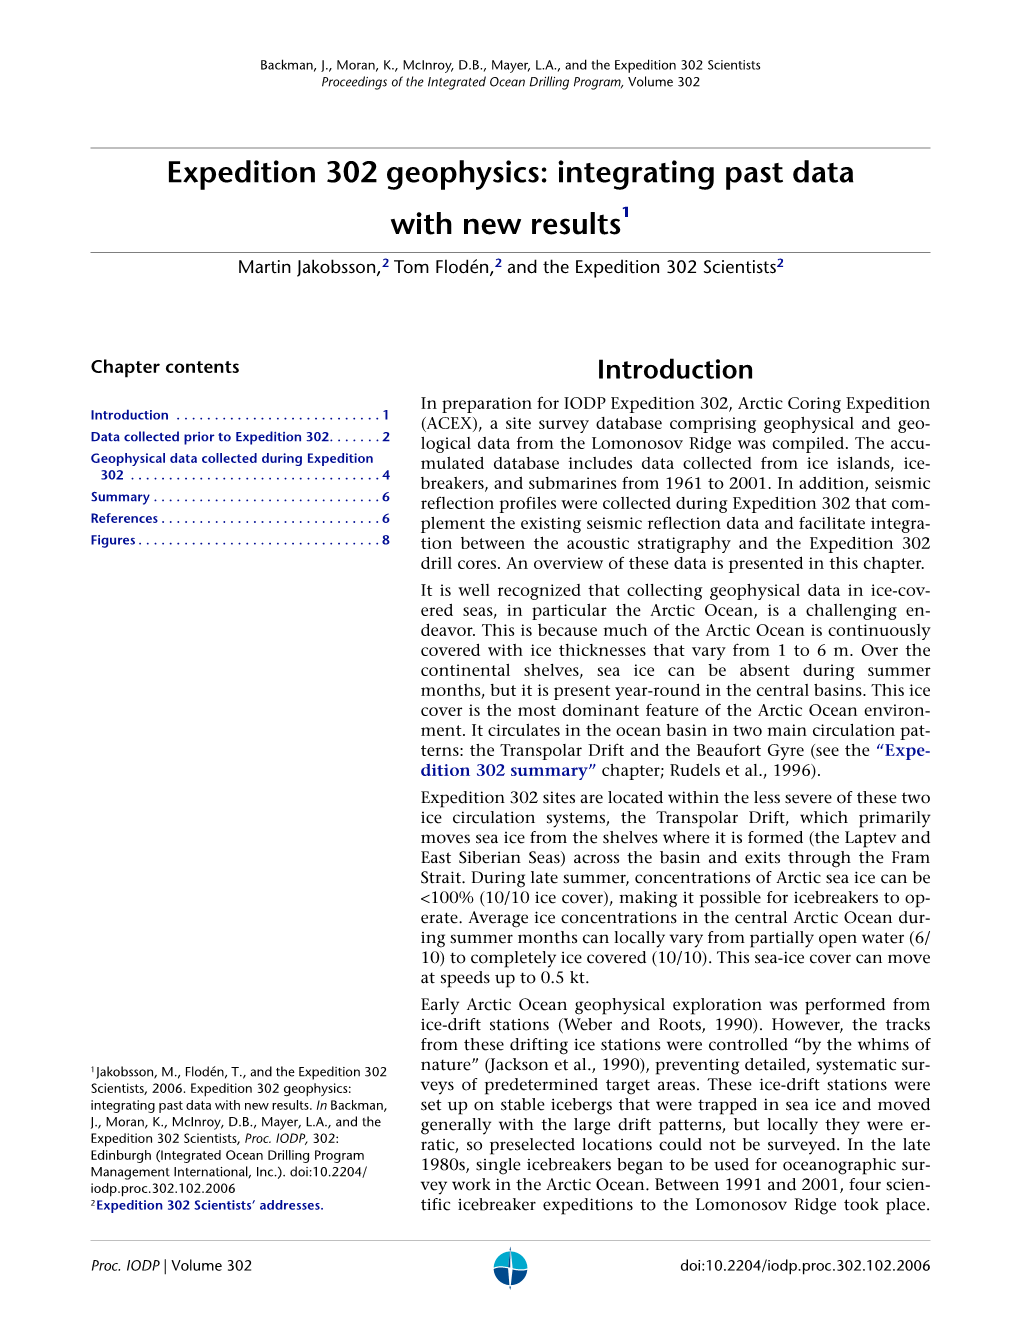 Expedition 302 Geophysics: Integrating Past Data with New Results1 Martin Jakobsson,2 Tom Flodén,2 and the Expedition 302 Scientists2